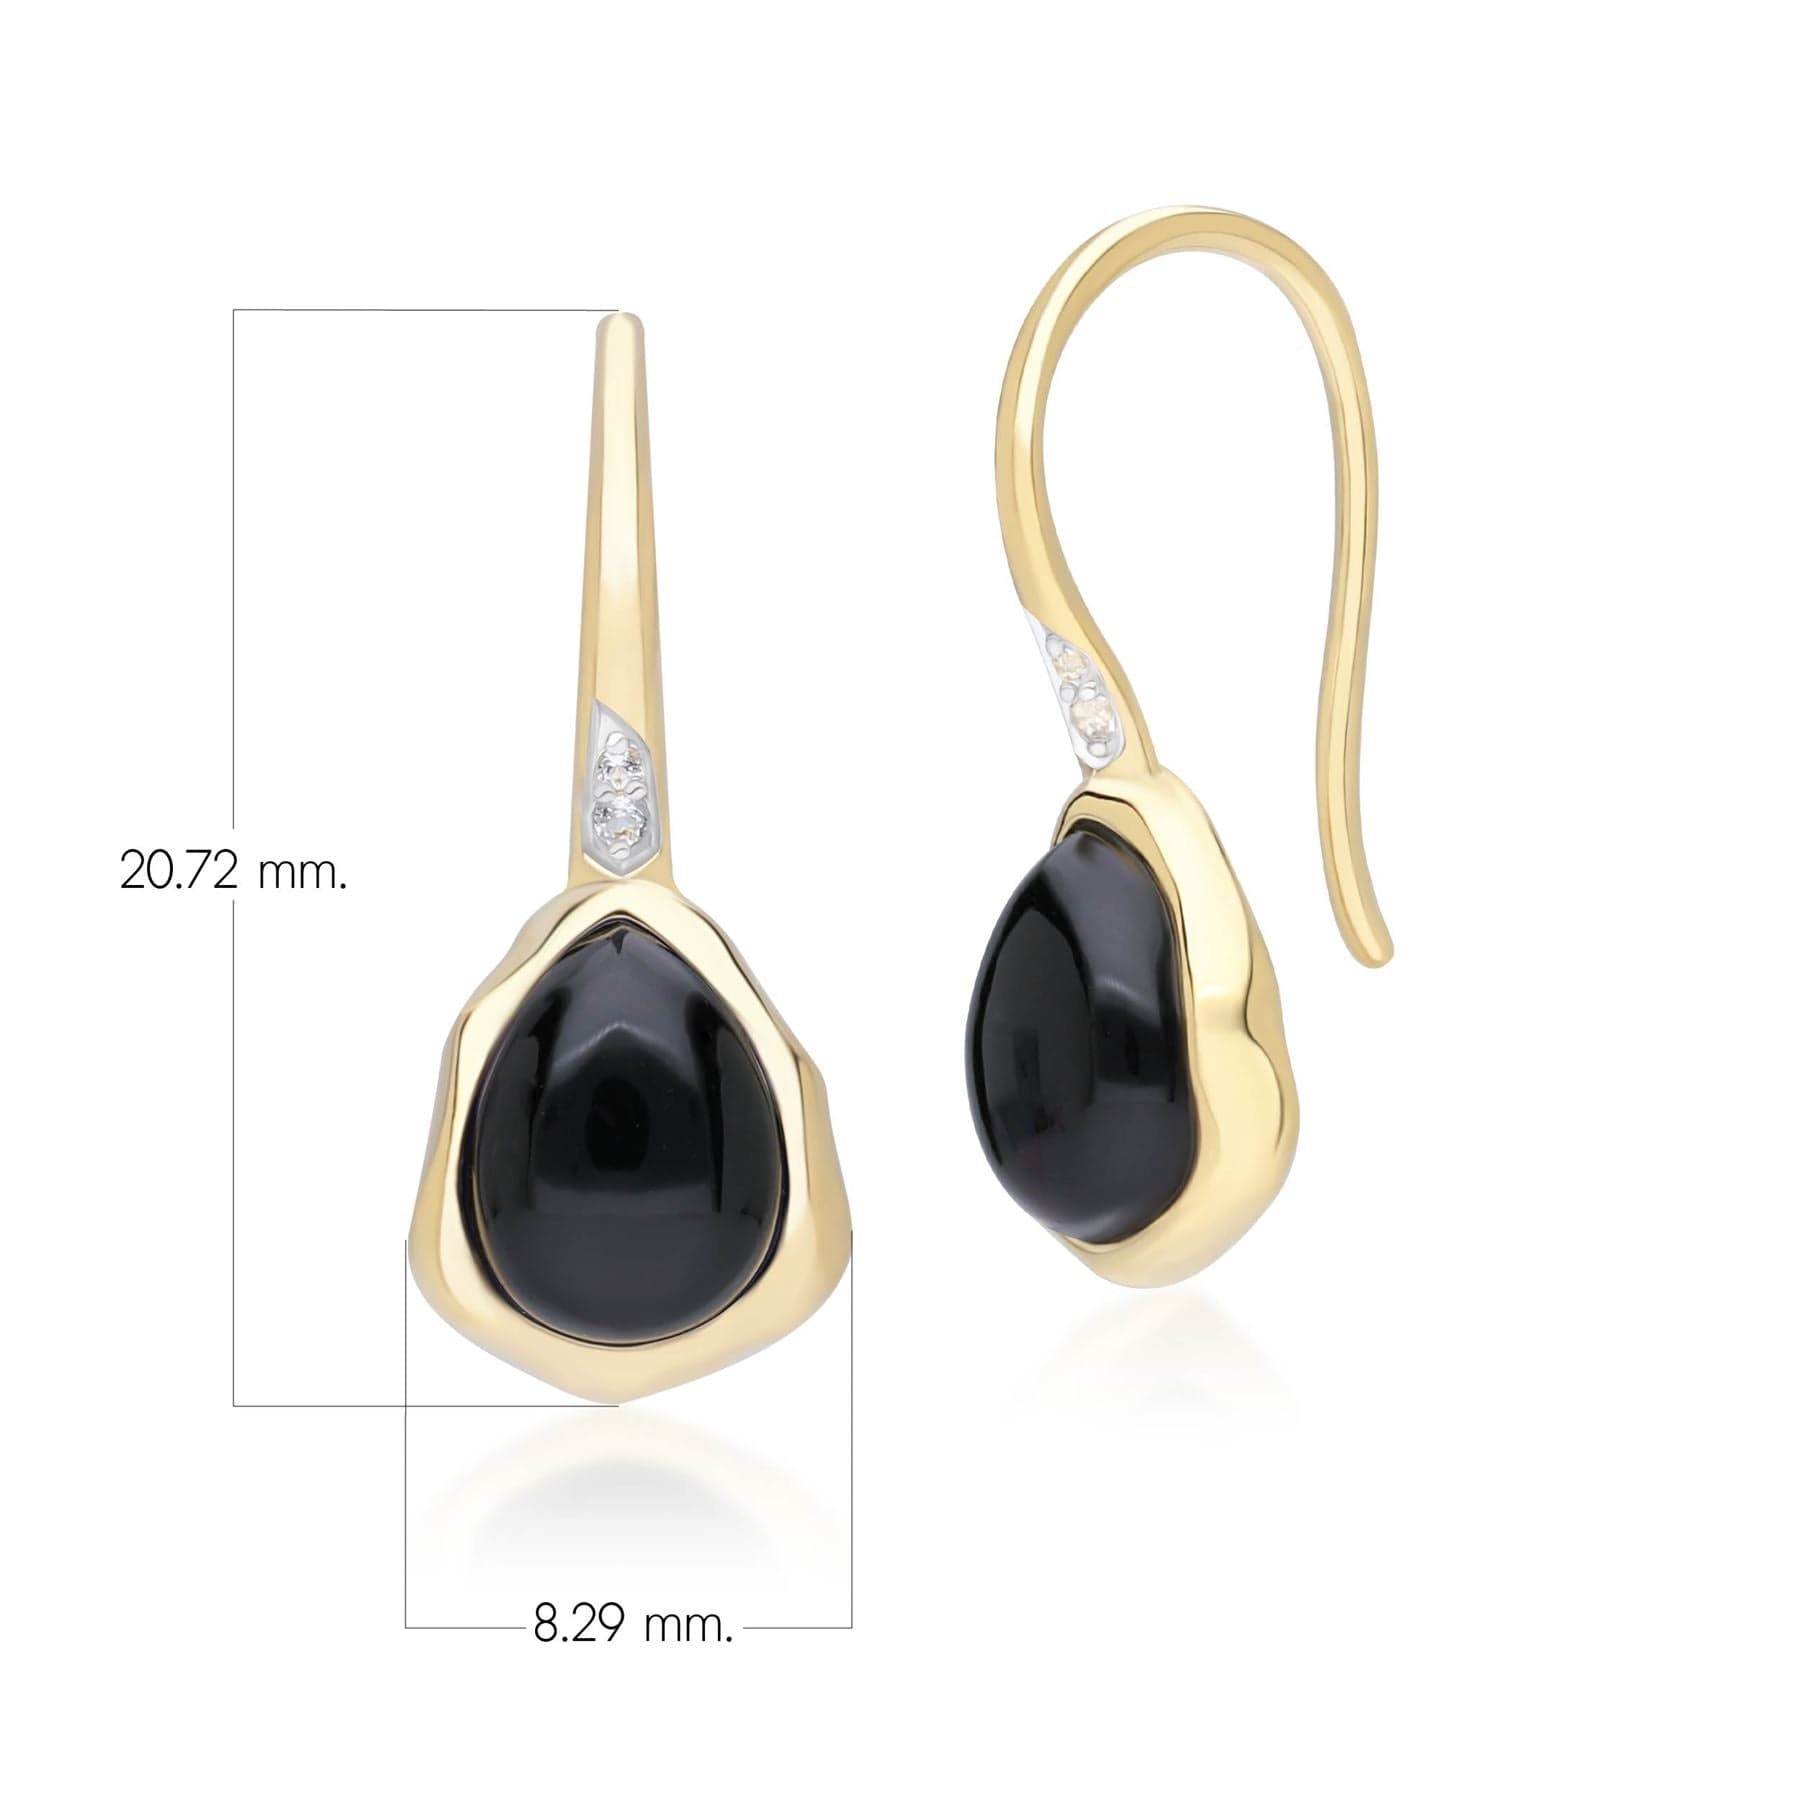 253E418703925 Irregular Black Onyx & Topaz  Drop Earrings In 18ct Gold Plated SterlIng Silver Dimensions